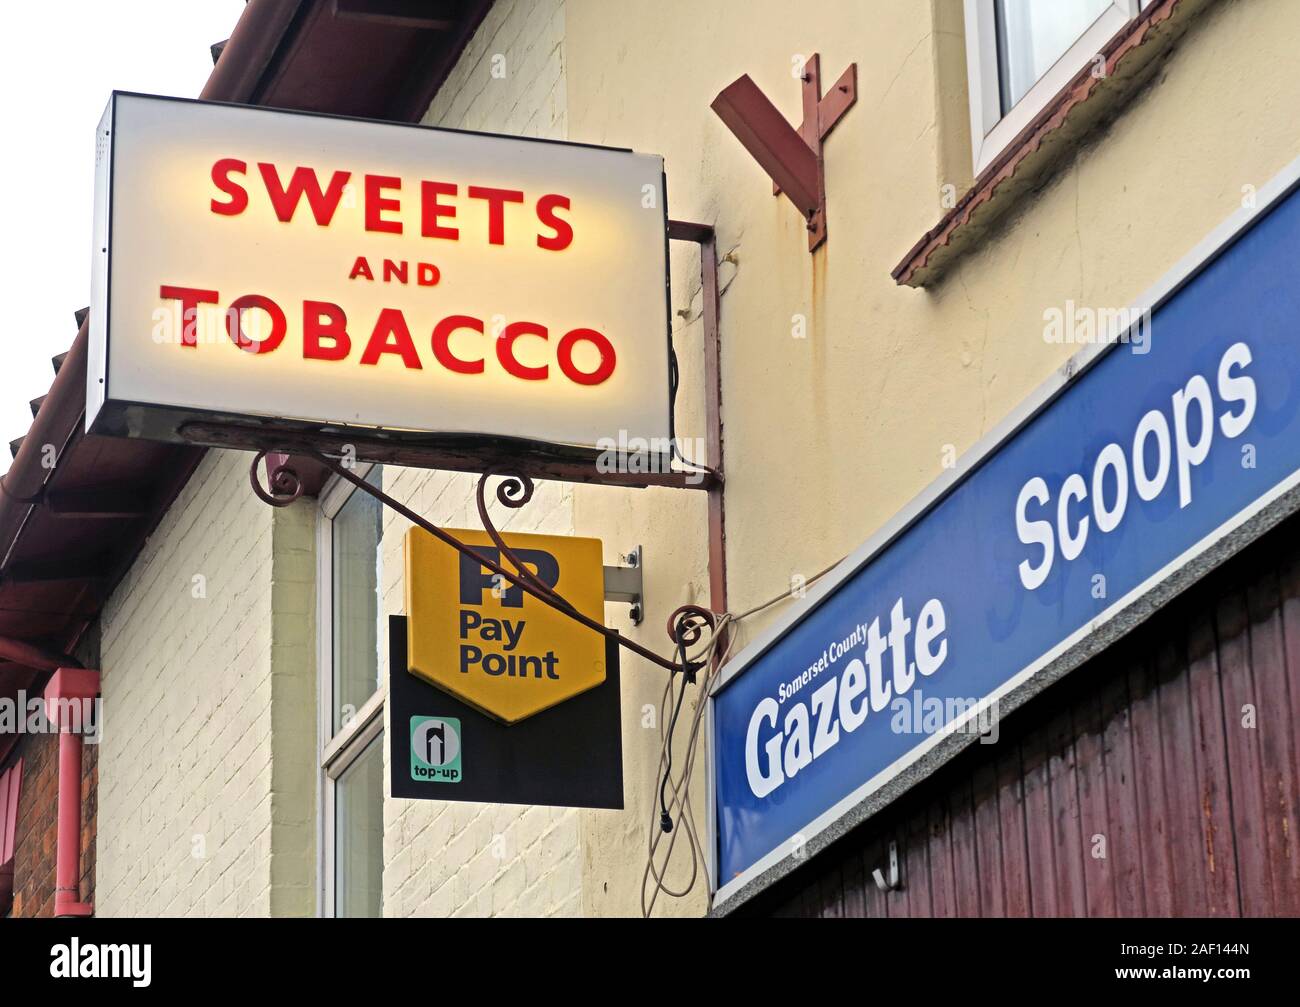 Sweet shop traditionnel, Eastover, Bridgwater, Somerset, Angleterre, Royaume-Uni, TA6 Banque D'Images